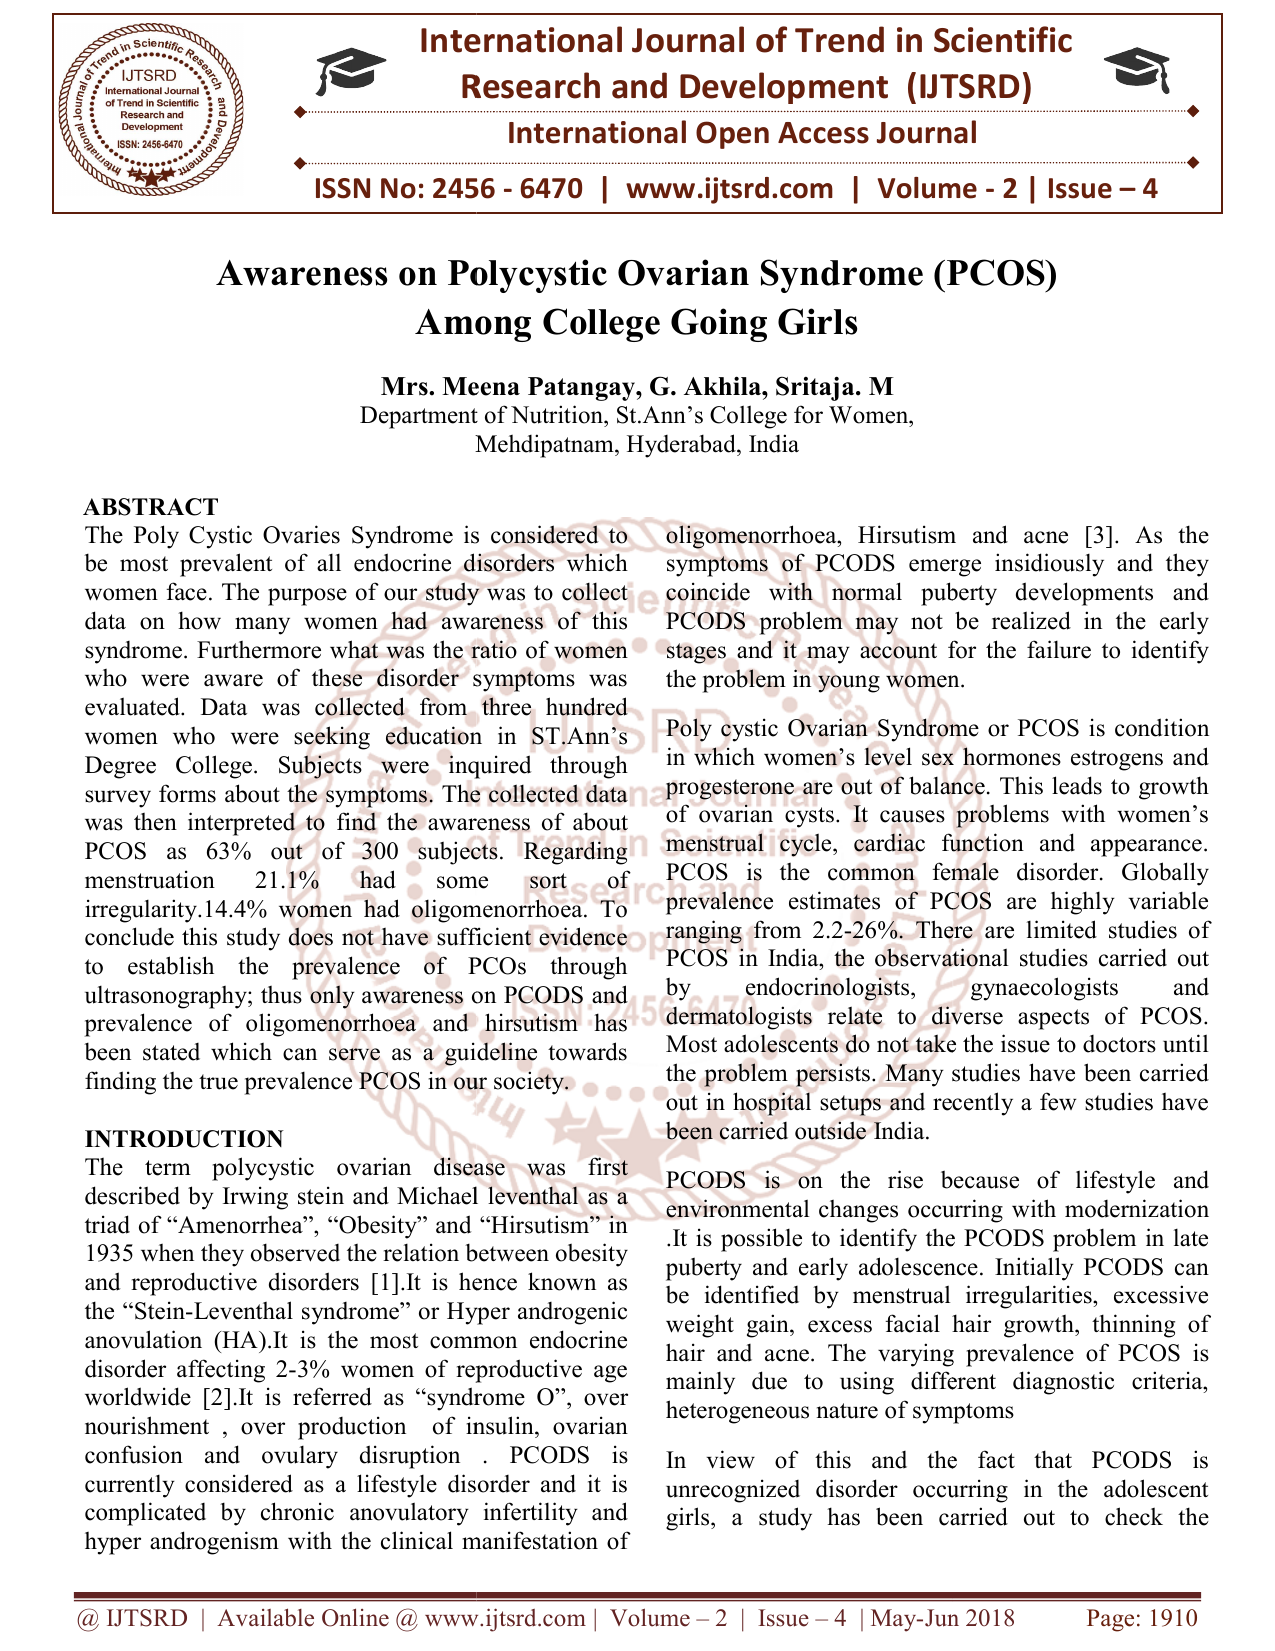 research paper on pcos pdf